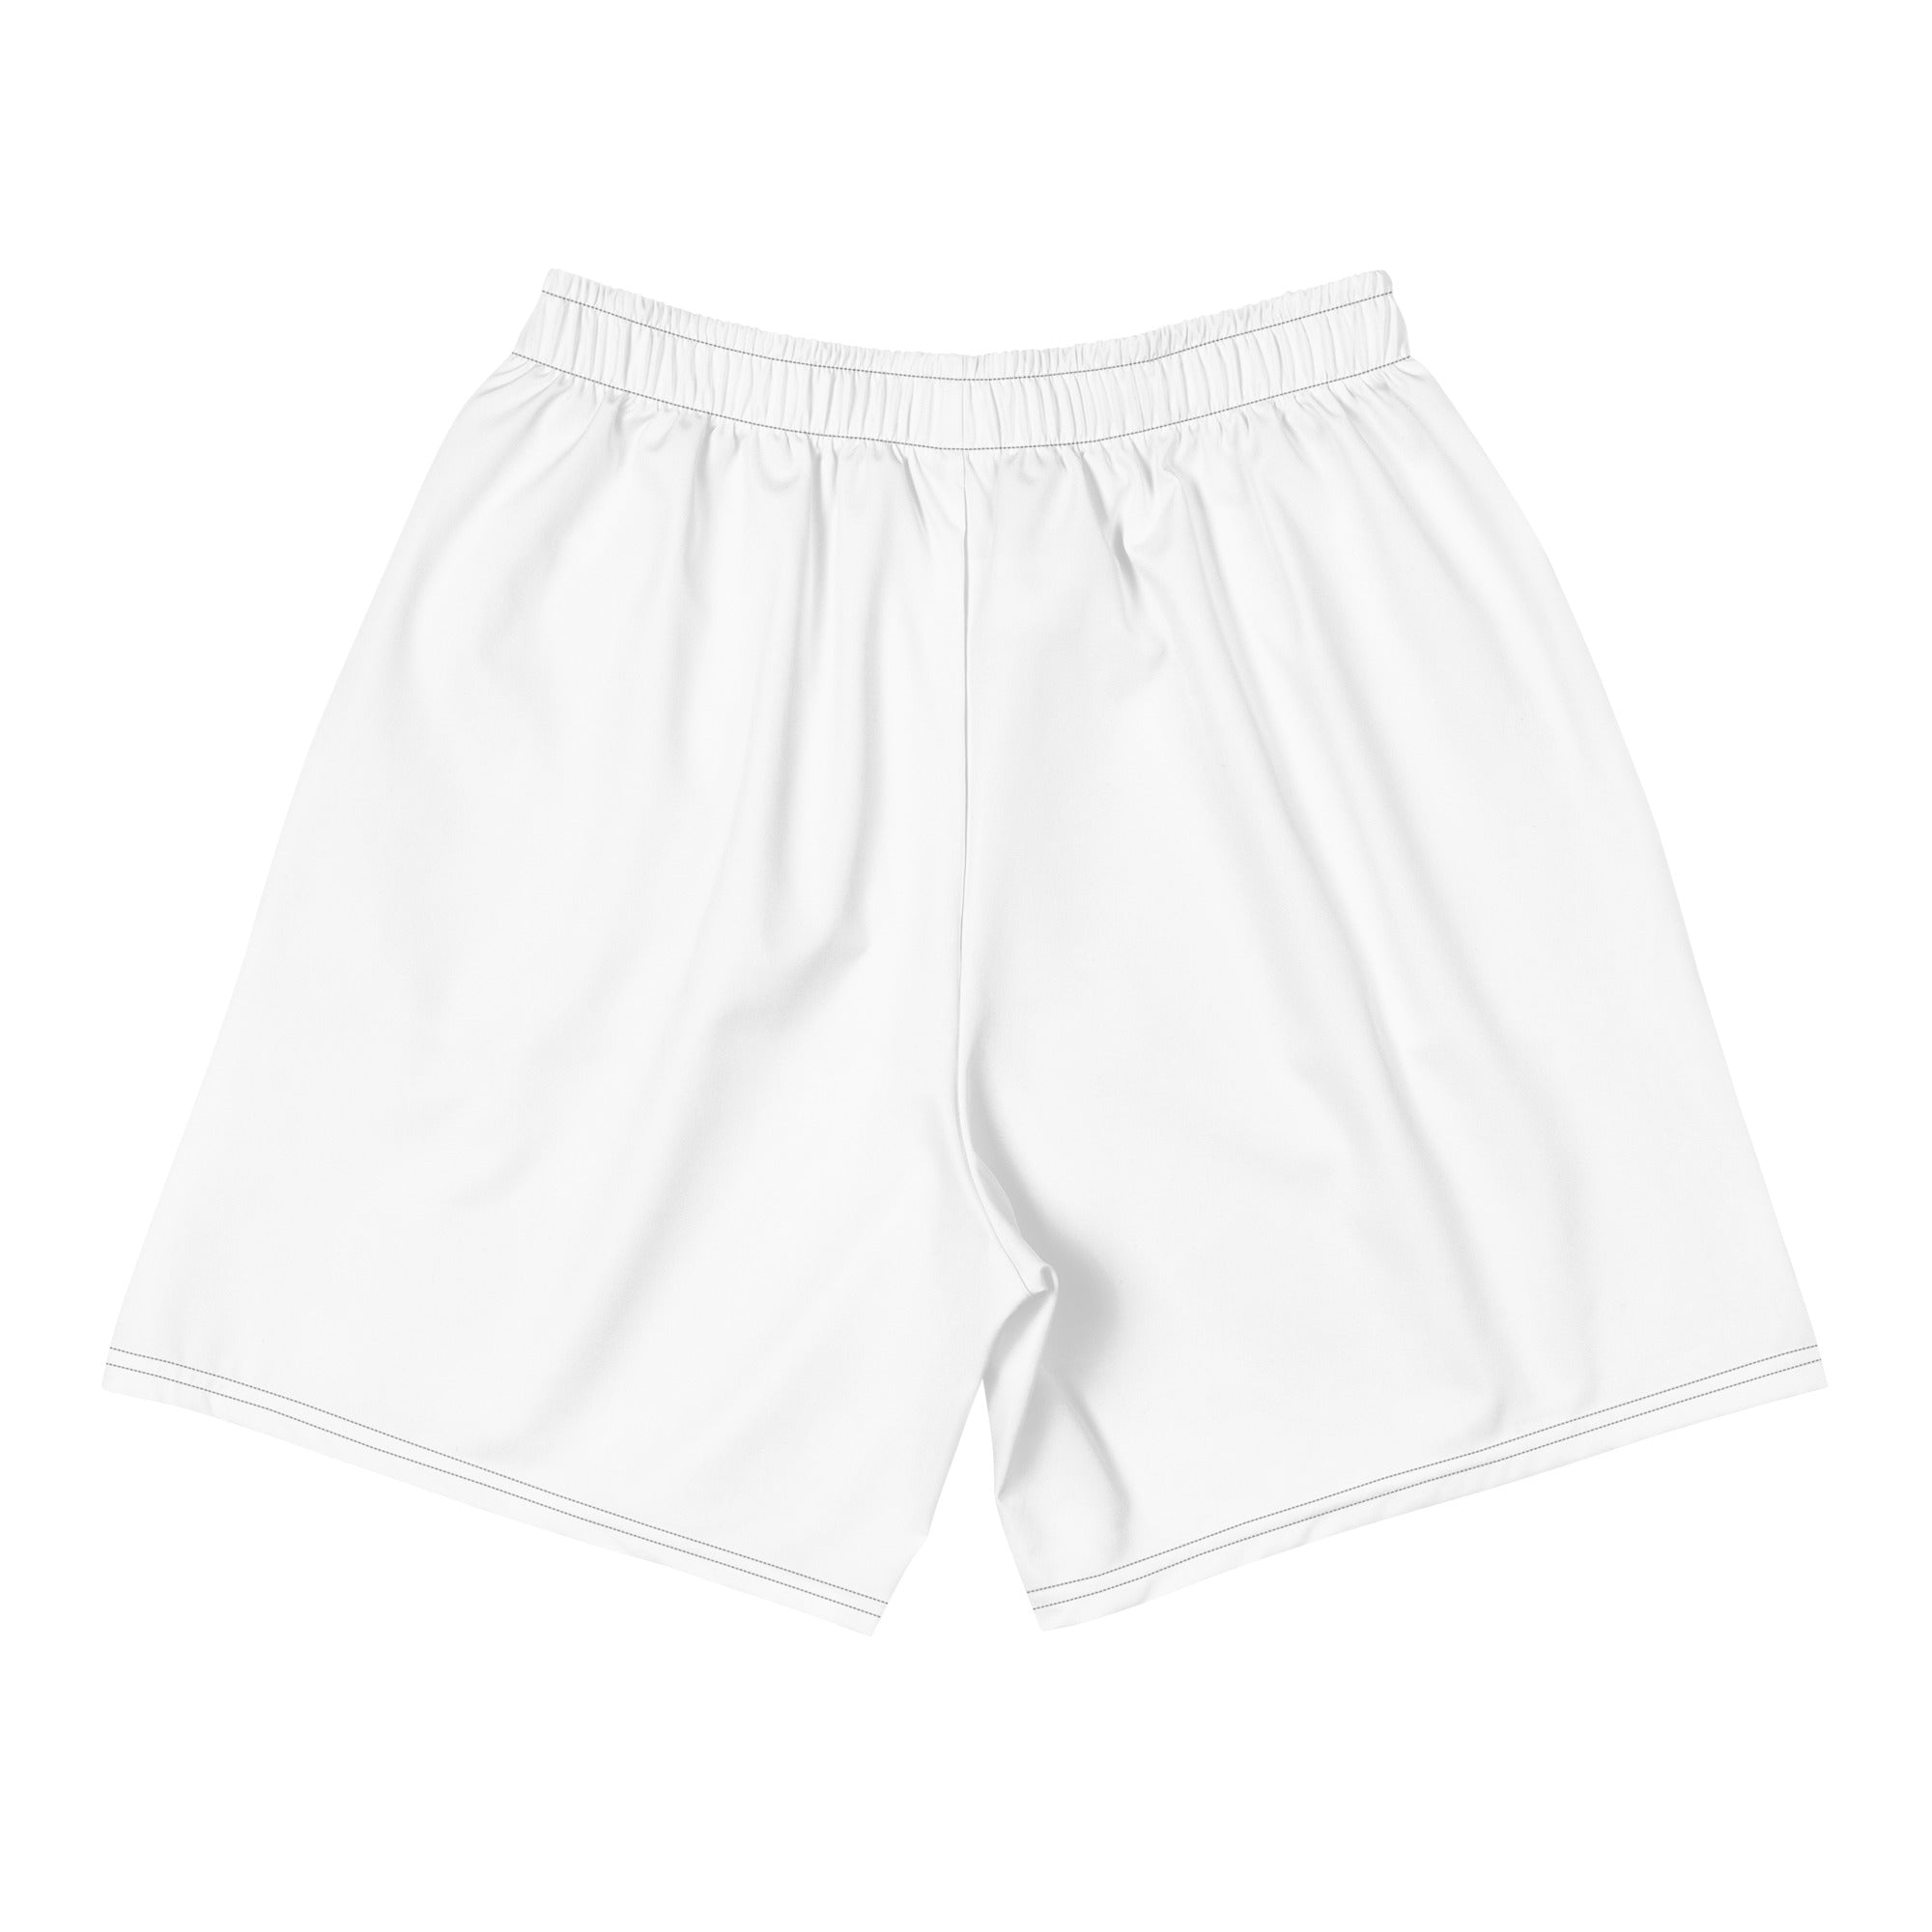 Love for the City - Men's Athletic Long Shorts